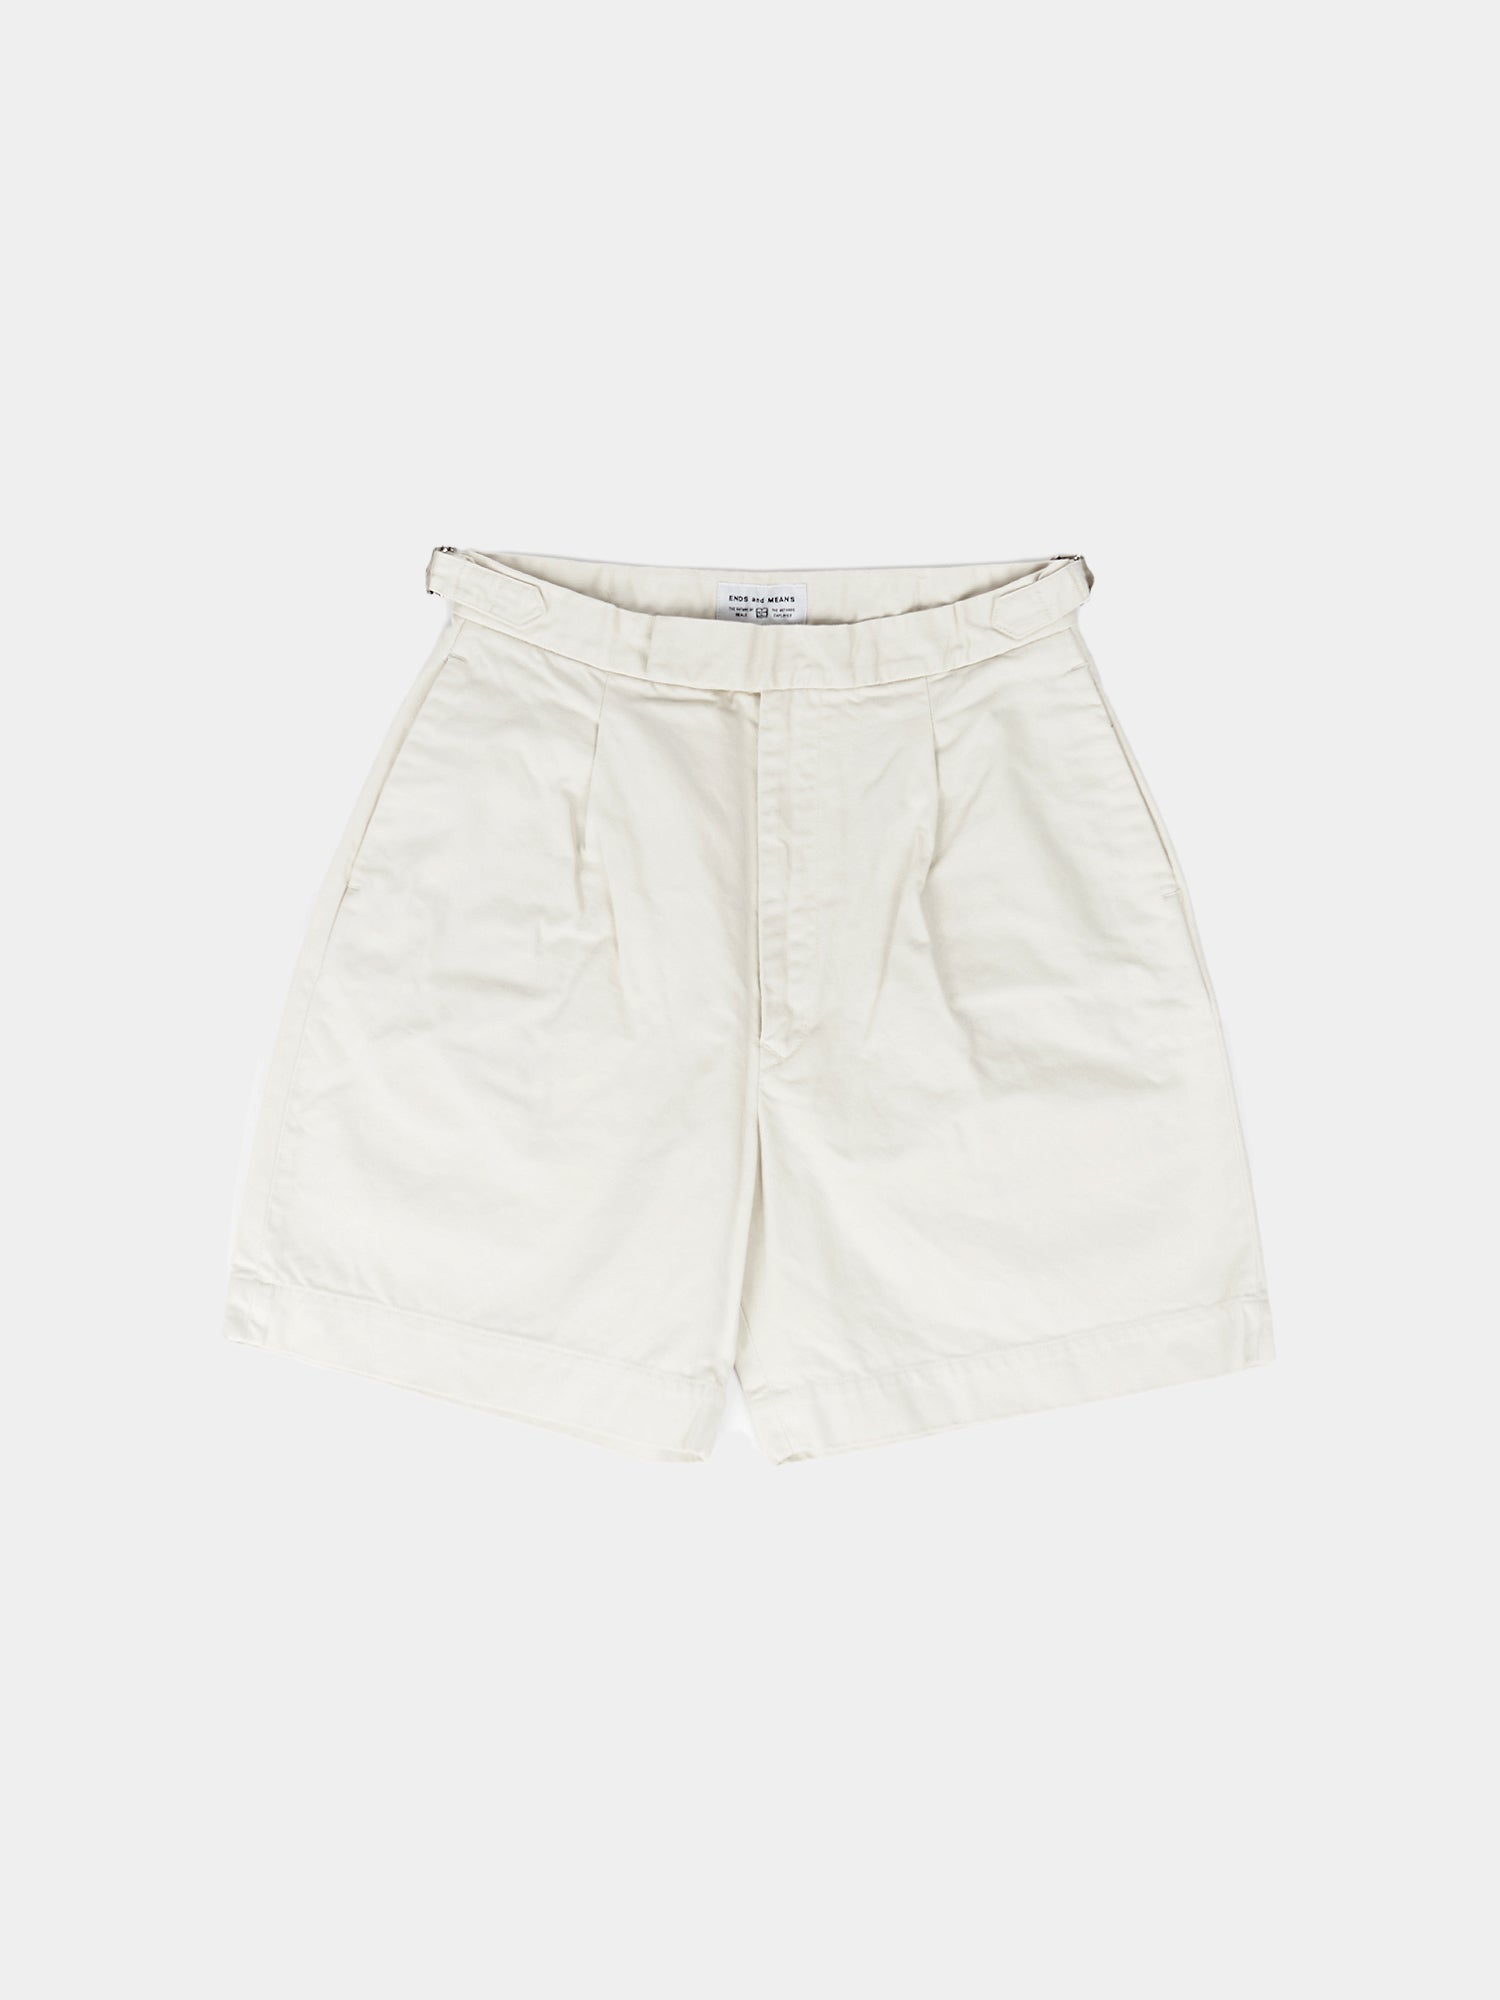 ENDS and MEANS / Easy Twill Shorts 新品